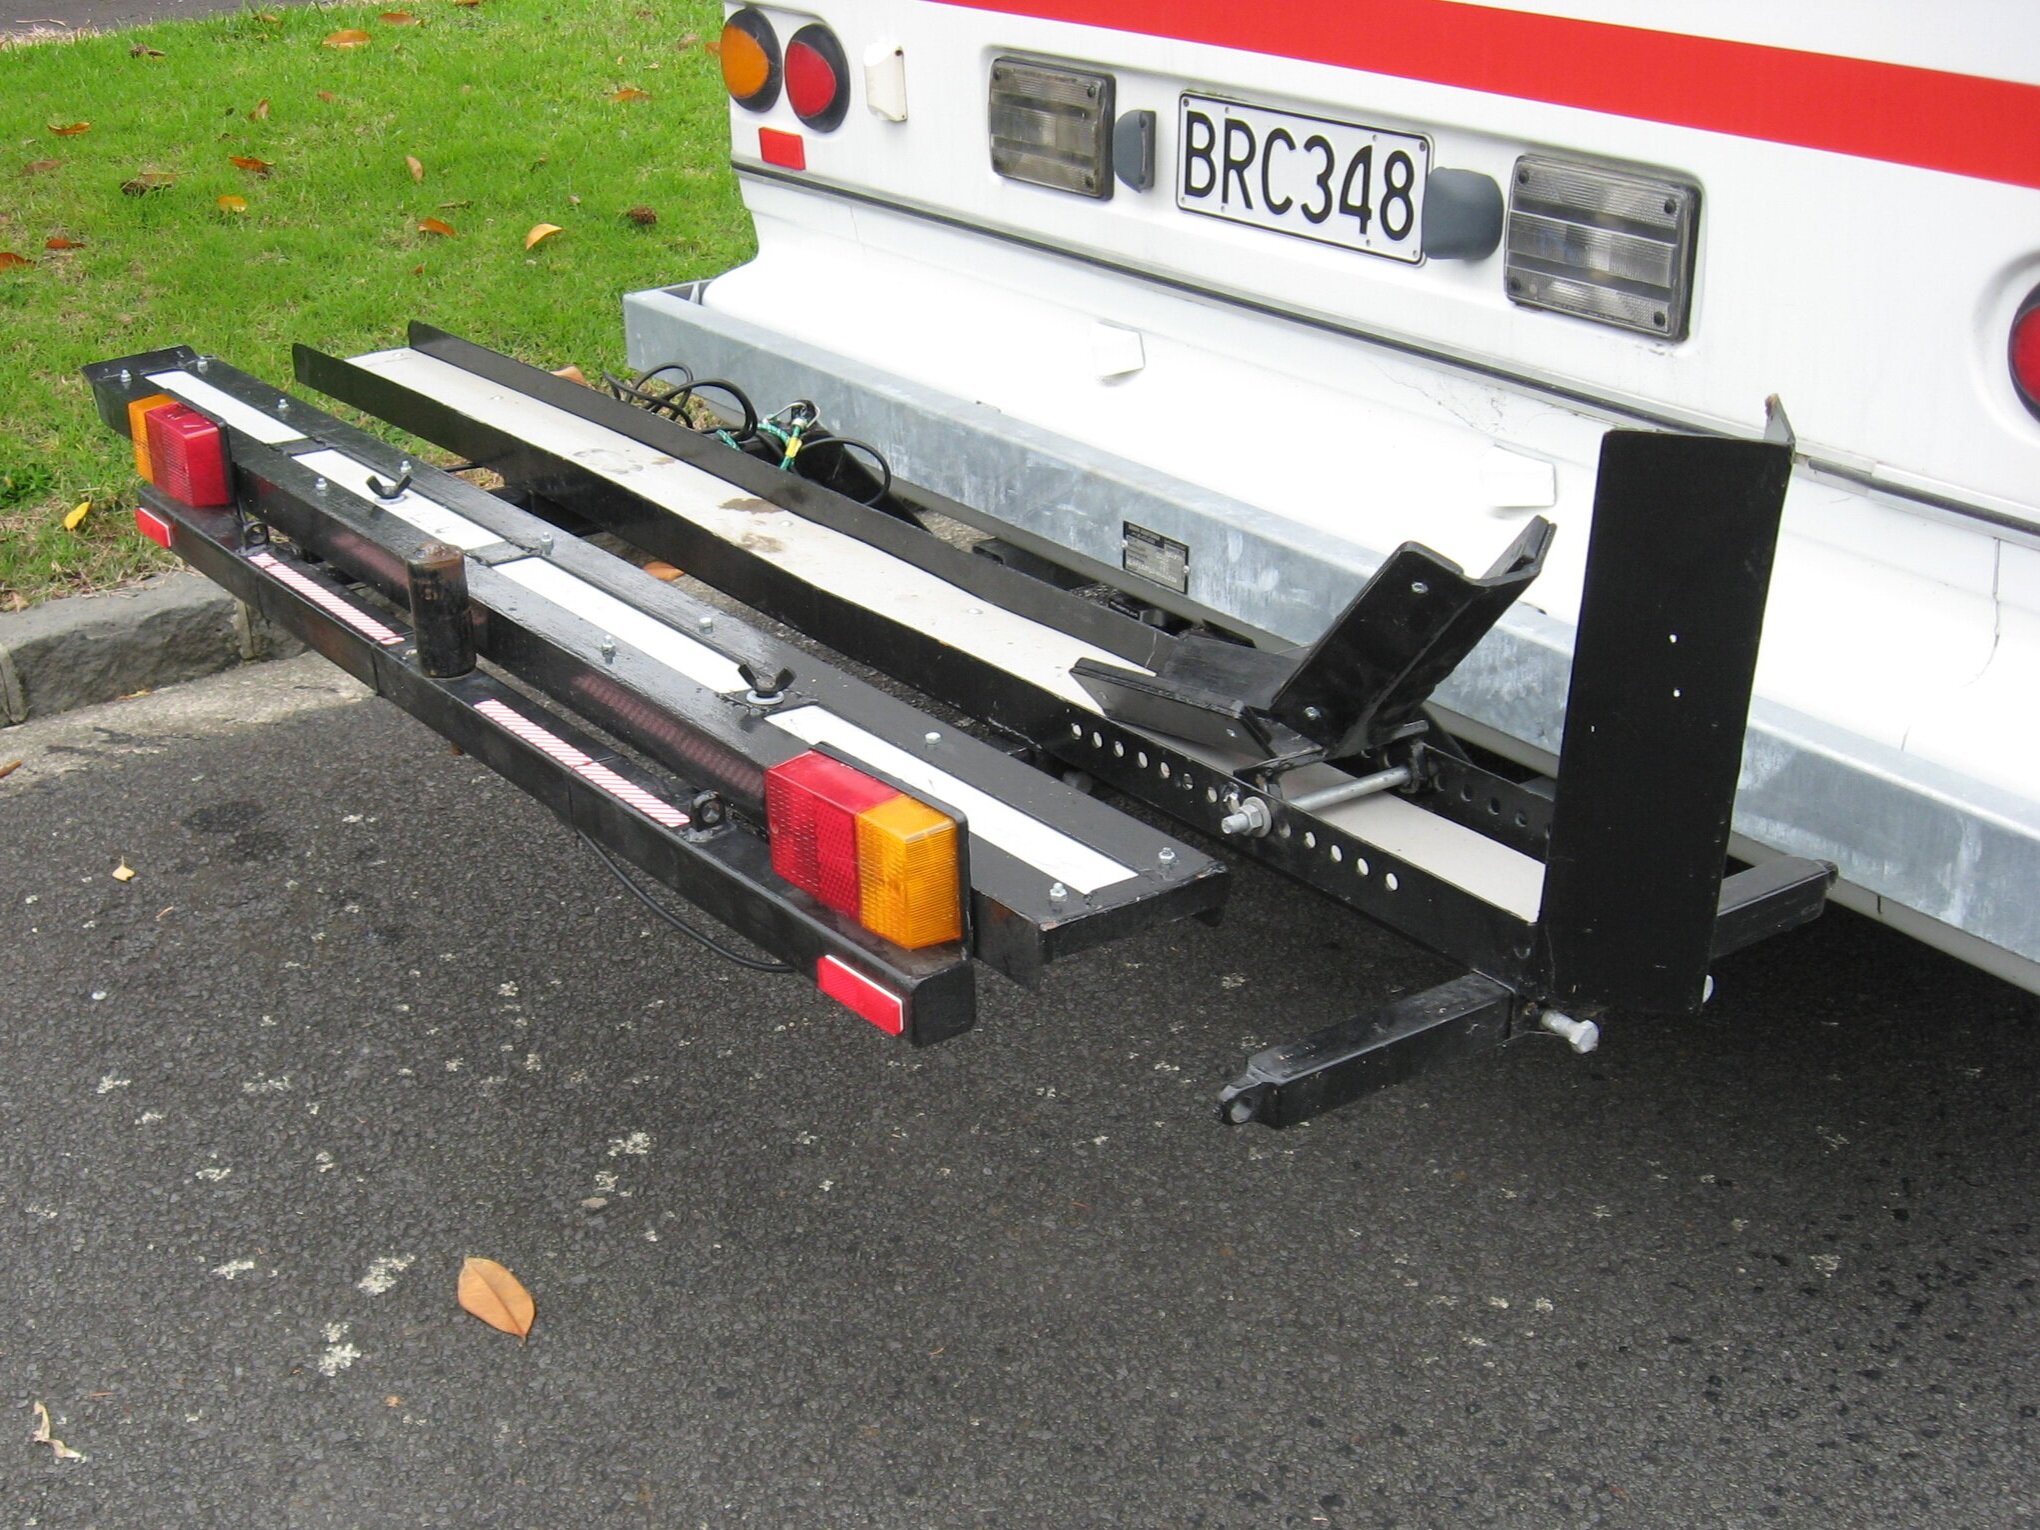 Scooter carrier in place, with pivoting wheel clamp. Note ramp held upside down with bolts topped by wing nuts